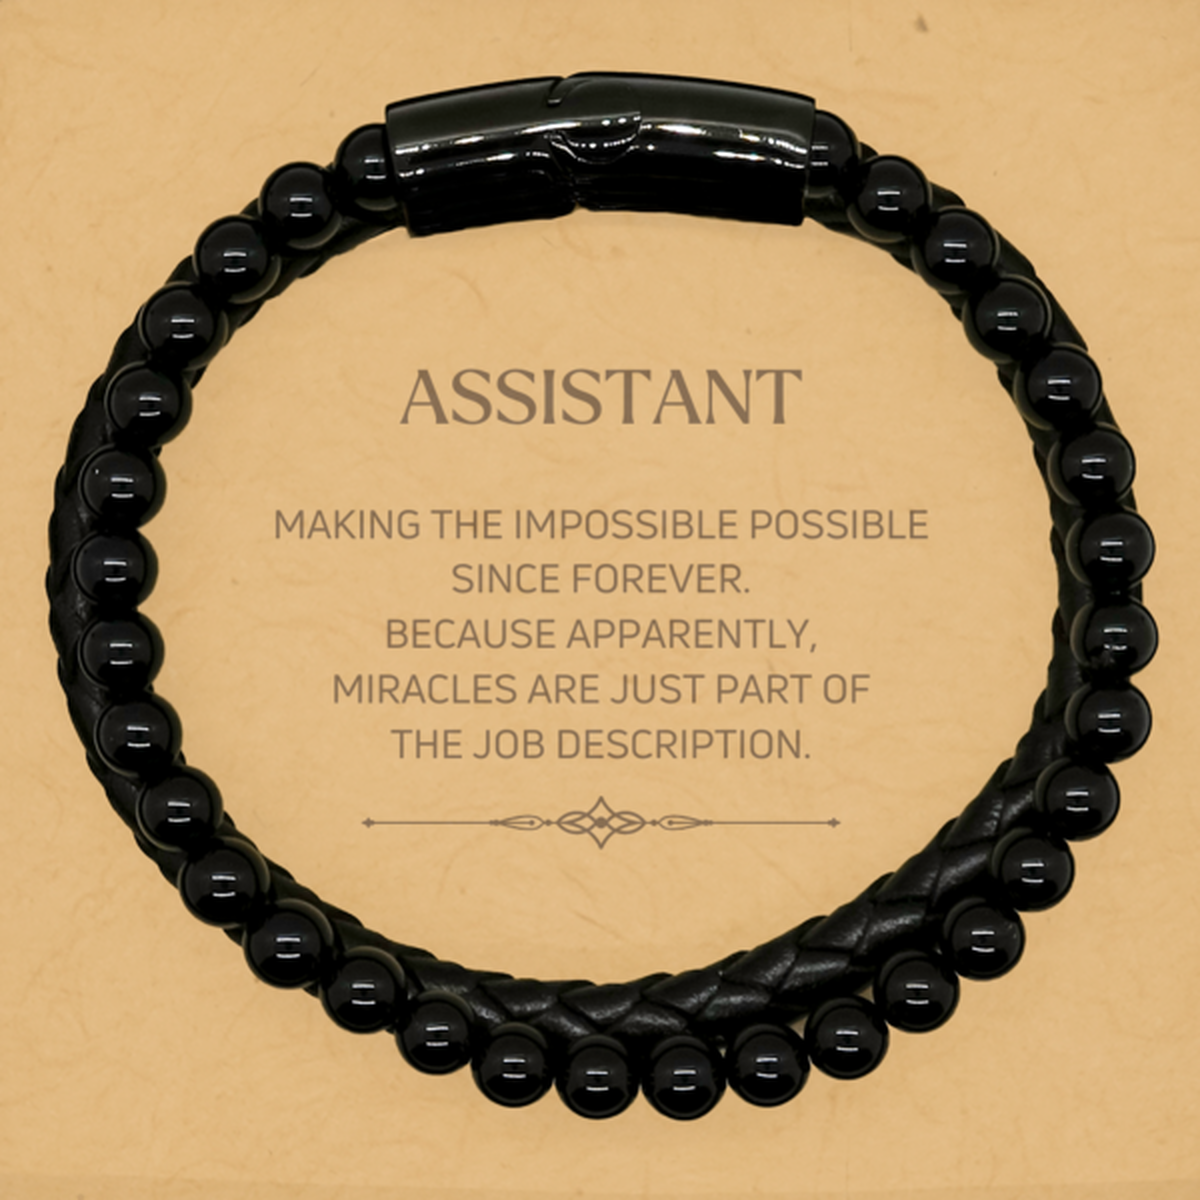 Funny Assistant Gifts, Miracles are just part of the job description, Inspirational Birthday Stone Leather Bracelets For Assistant, Men, Women, Coworkers, Friends, Boss